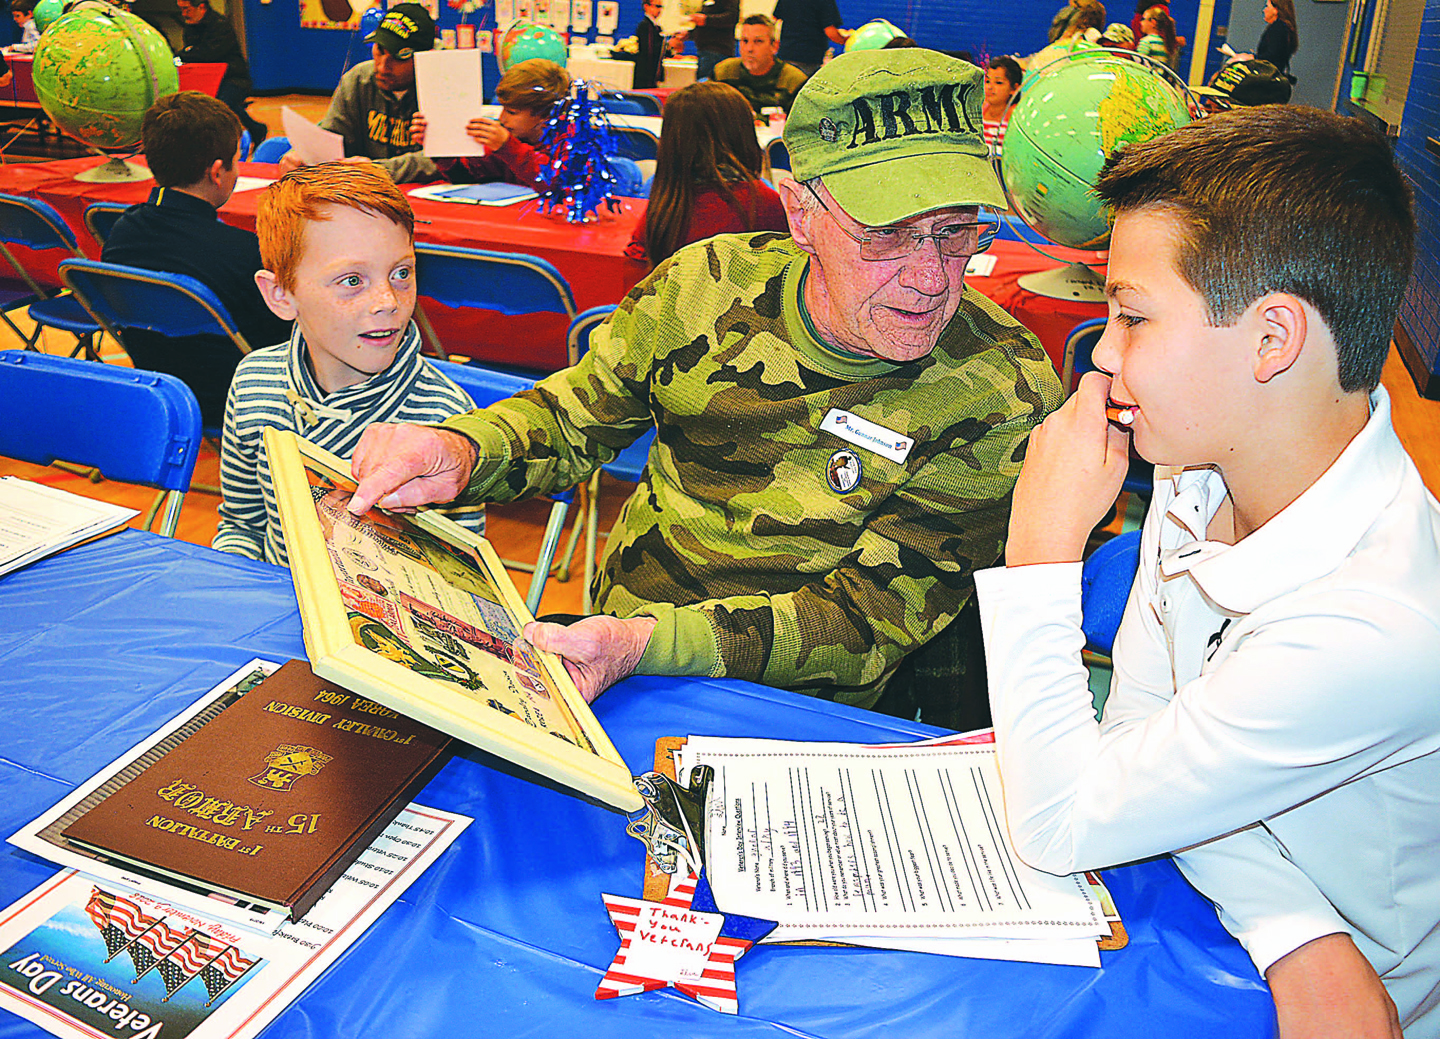 Gunnar Johnson (center), a U.S. Army veteran who served from 1963-64, shares his military experiences with fifth-graders Gavin Lewis (left) and Finn McDevitt. Photo by C.J. Carnacchio.